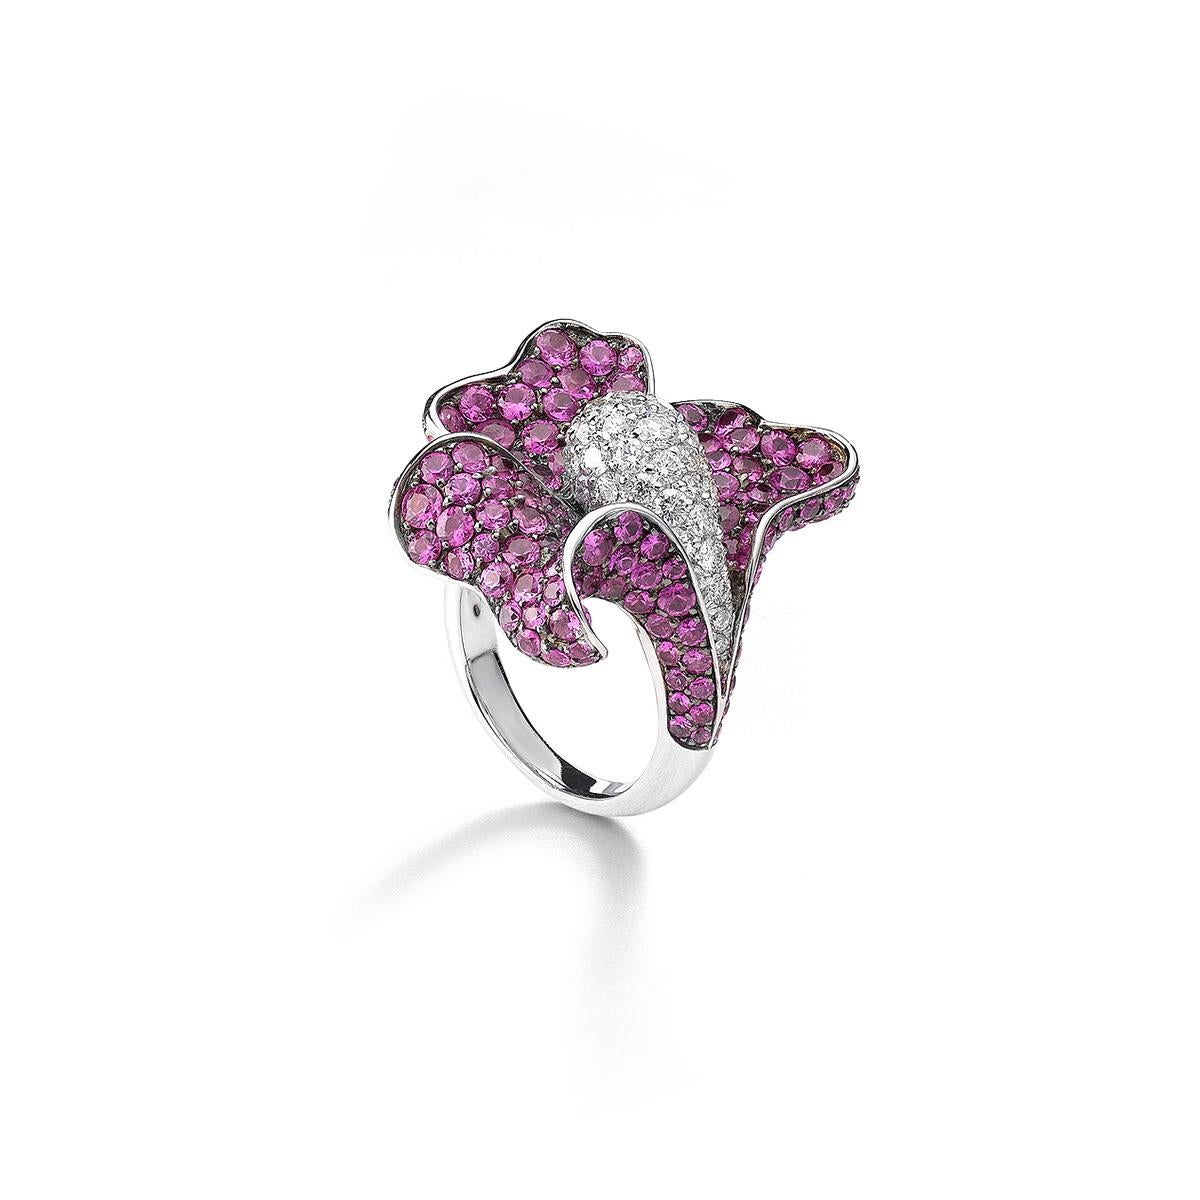 Ring in 18kt white gold set with 61 diamonds 1.86 cts and 175 pink sapphires 6.31 cts Size 54            